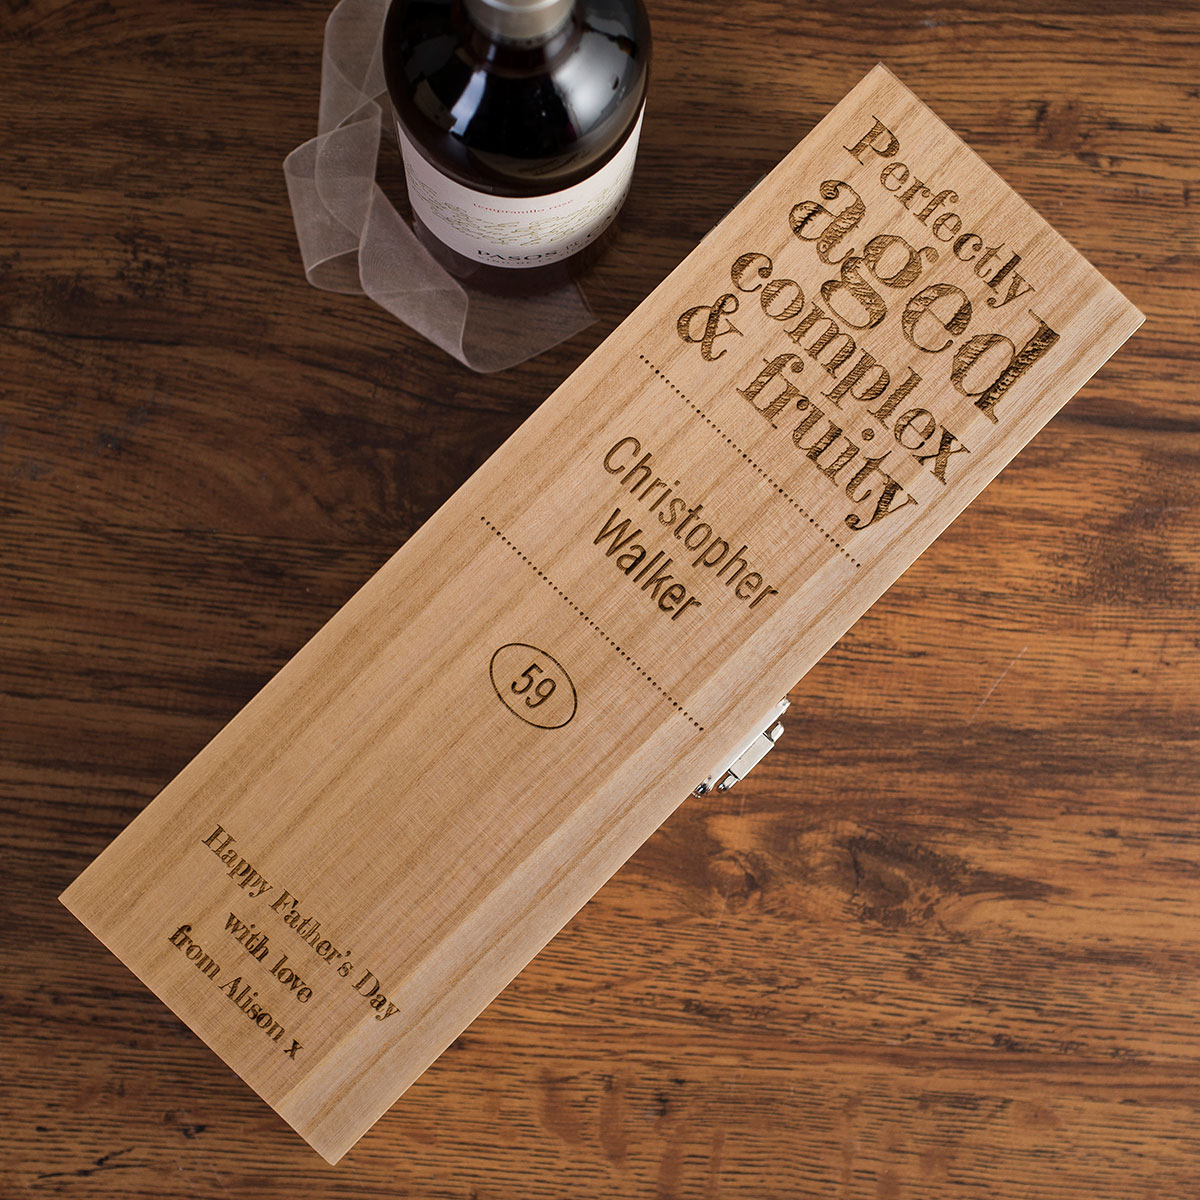 Personalised Luxury Wooden Wine Box - Perfectly Aged